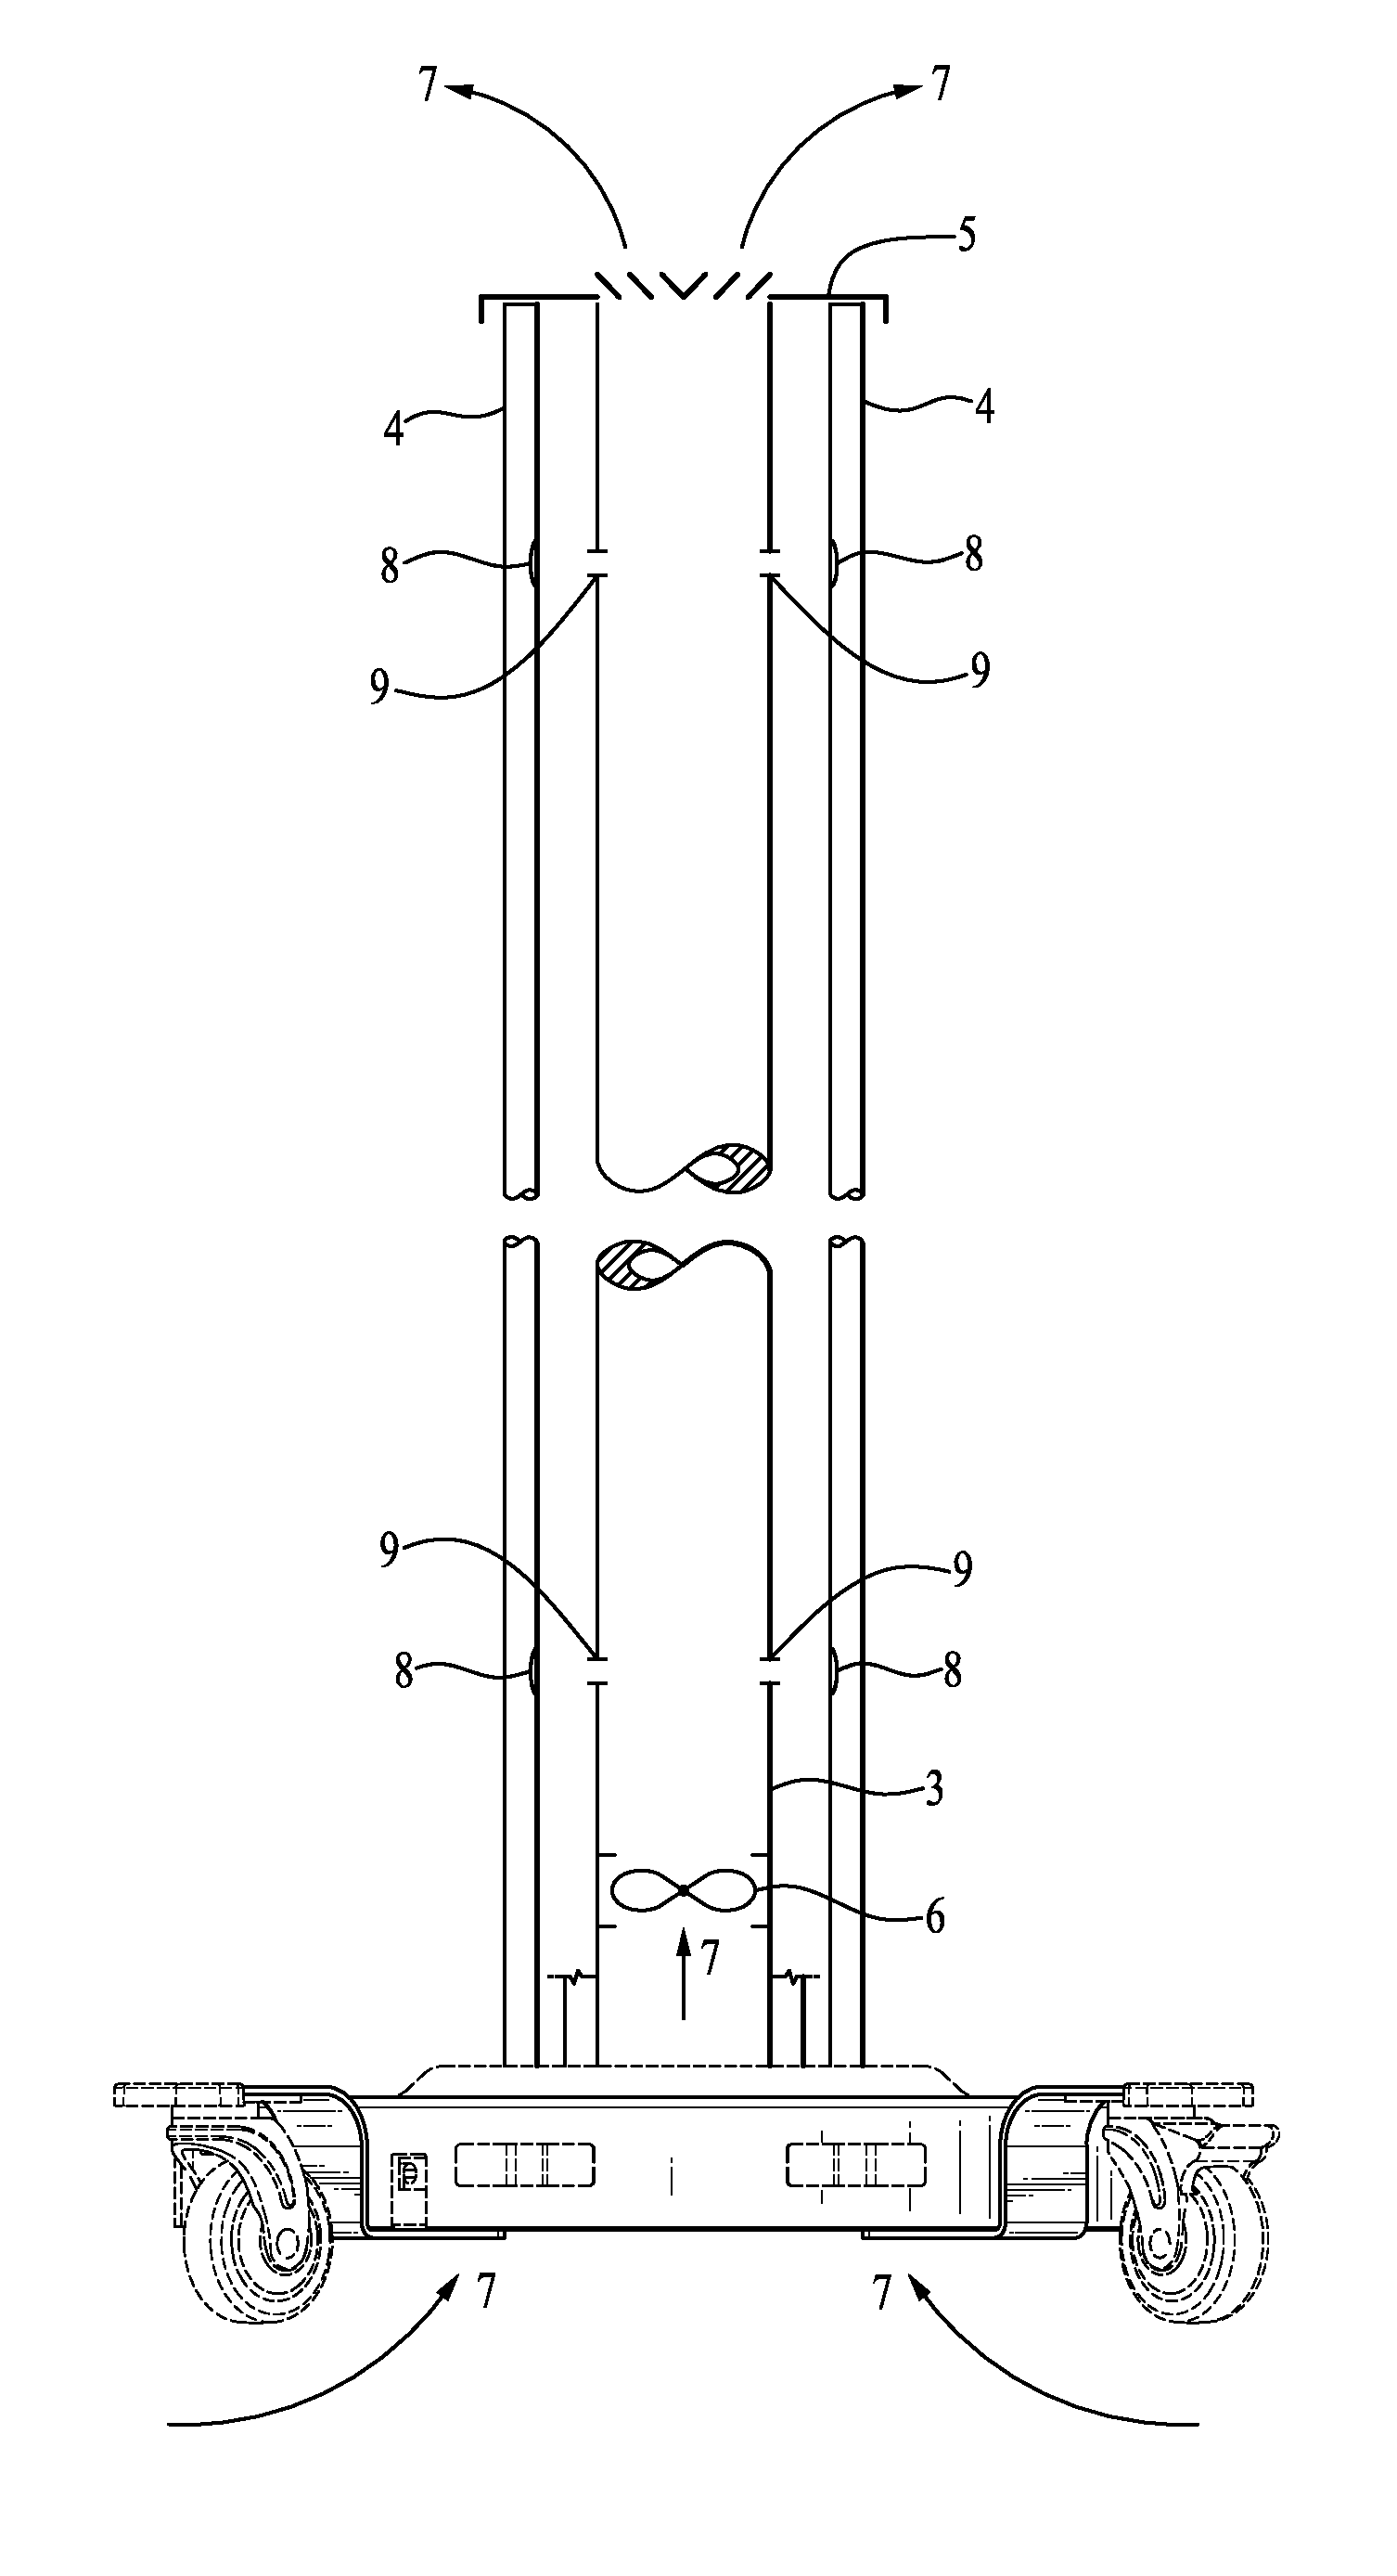 Method and apparatus for optimizing germicidal lamp performance in a disinfection device